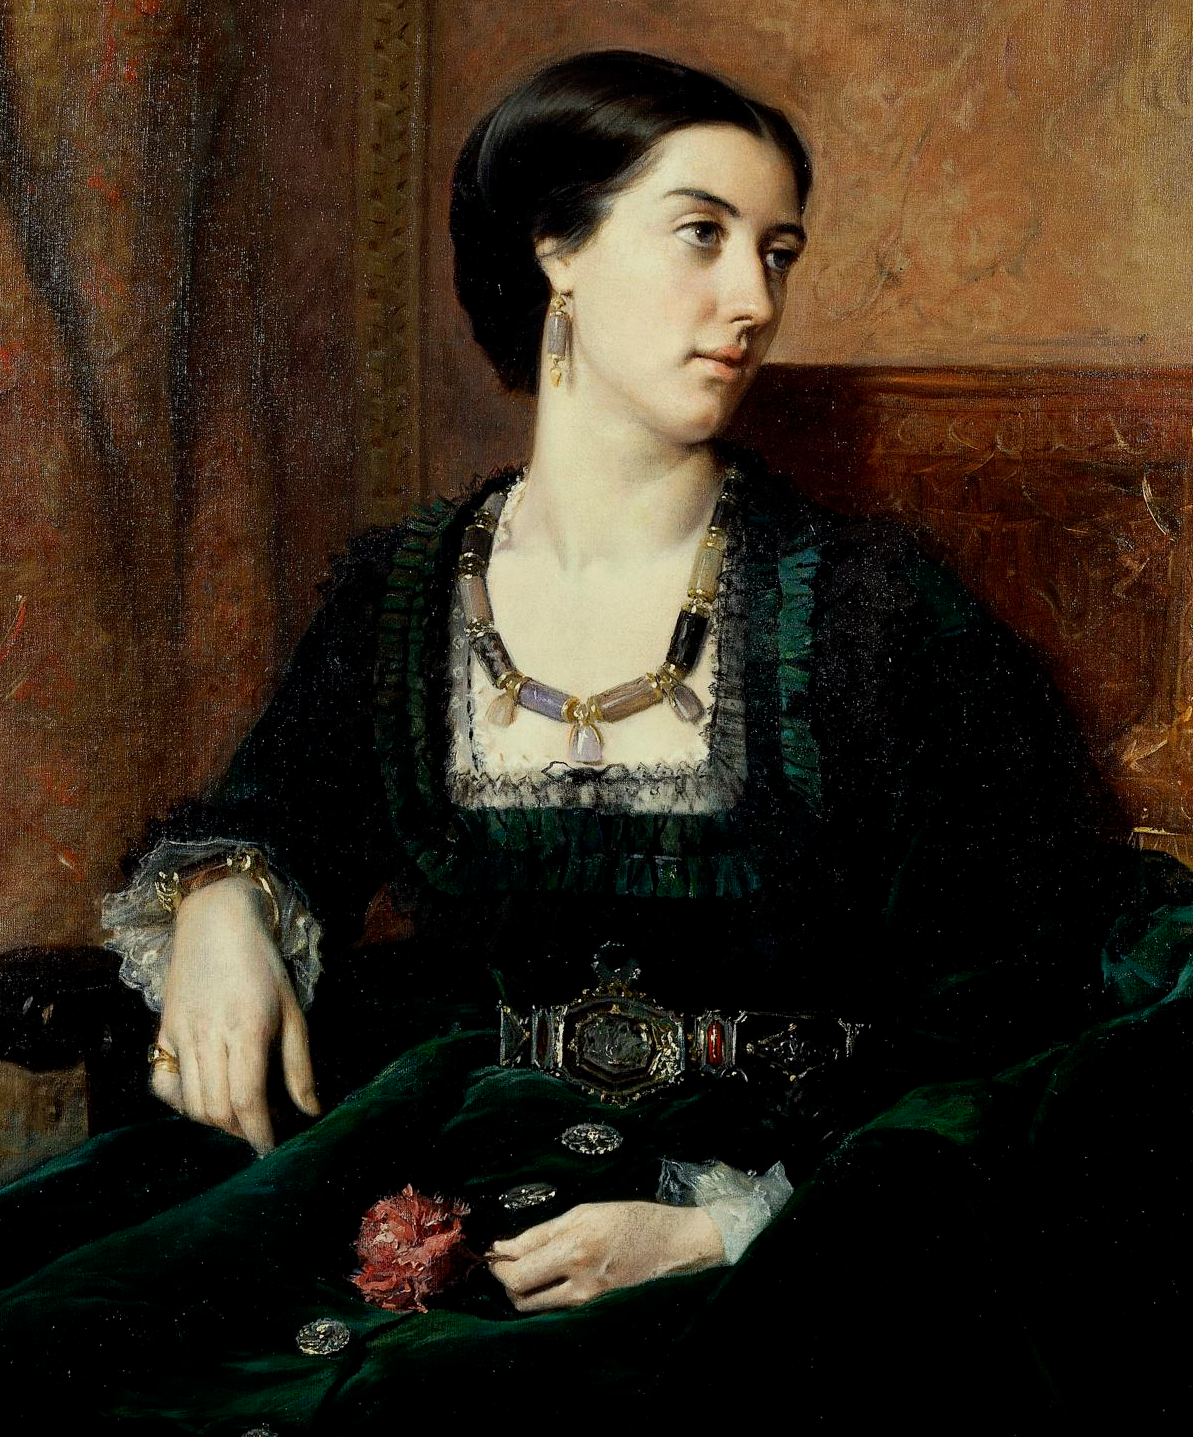 When she married her cousin and distinguished Assyrian excavator, he gave her a number of seals that he acquired from archeological sites and had them made into a necklace, bracelet and two earrings. In 1873, she wrote in her diary that when she dined with Queen Victoria at Osborne House, Isle of Wight, the jewelry was “much admired”. Portrait of Lady Ladyard by Vicente Palmaroli y González, 1870. The British Museum. 